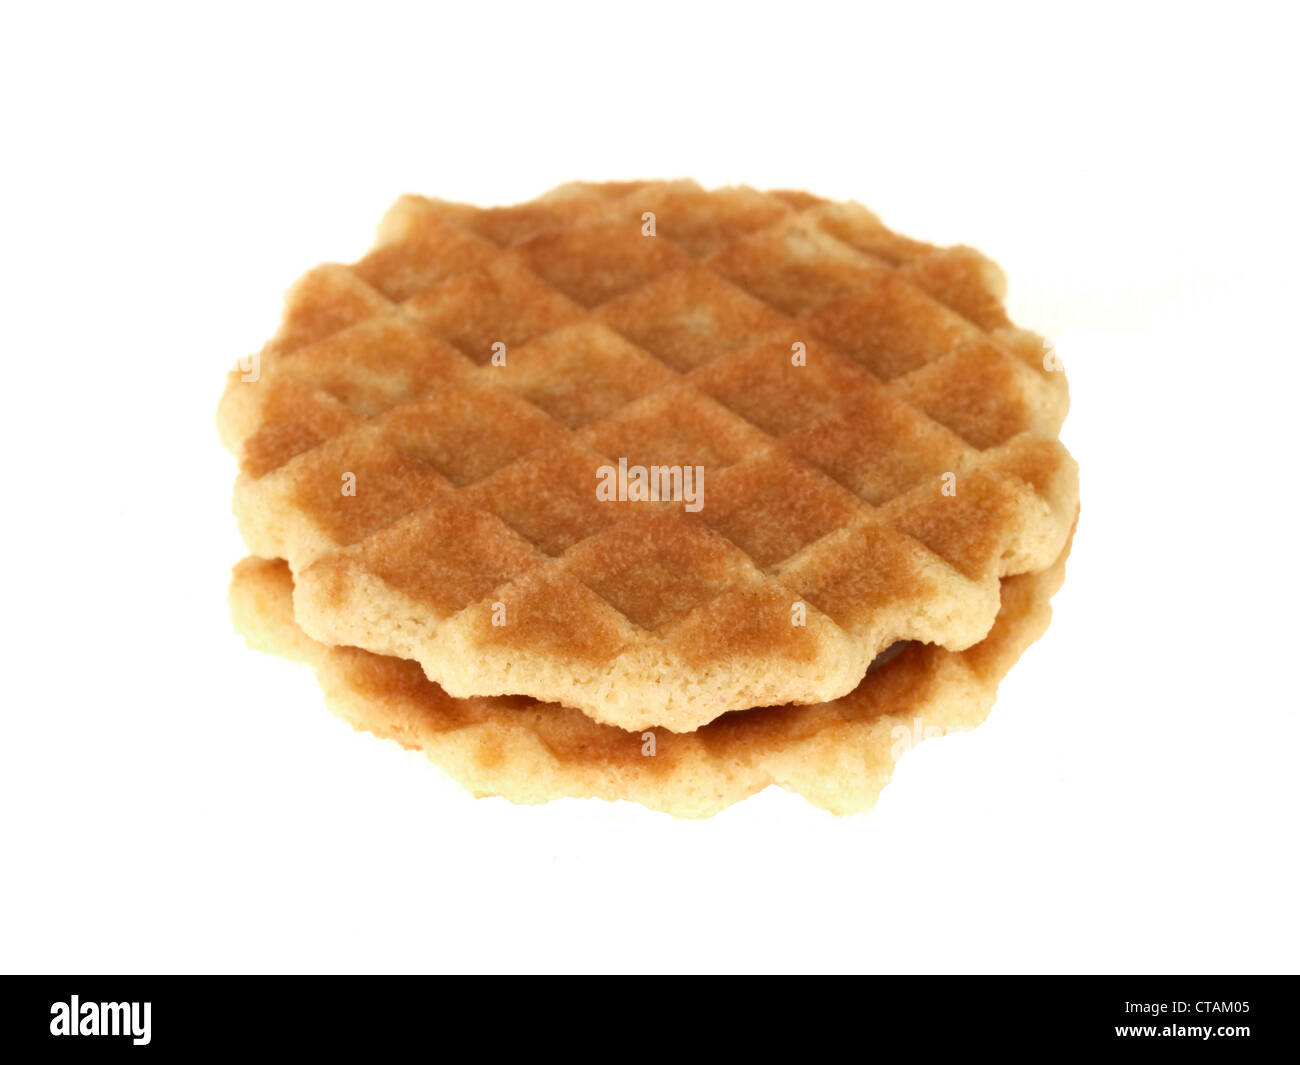 Fresh European Style Tasty Breakfast Chocolate Waffle Sandwich Snacks Against A White Background, With A Clipping Path, And No People Stock Photo